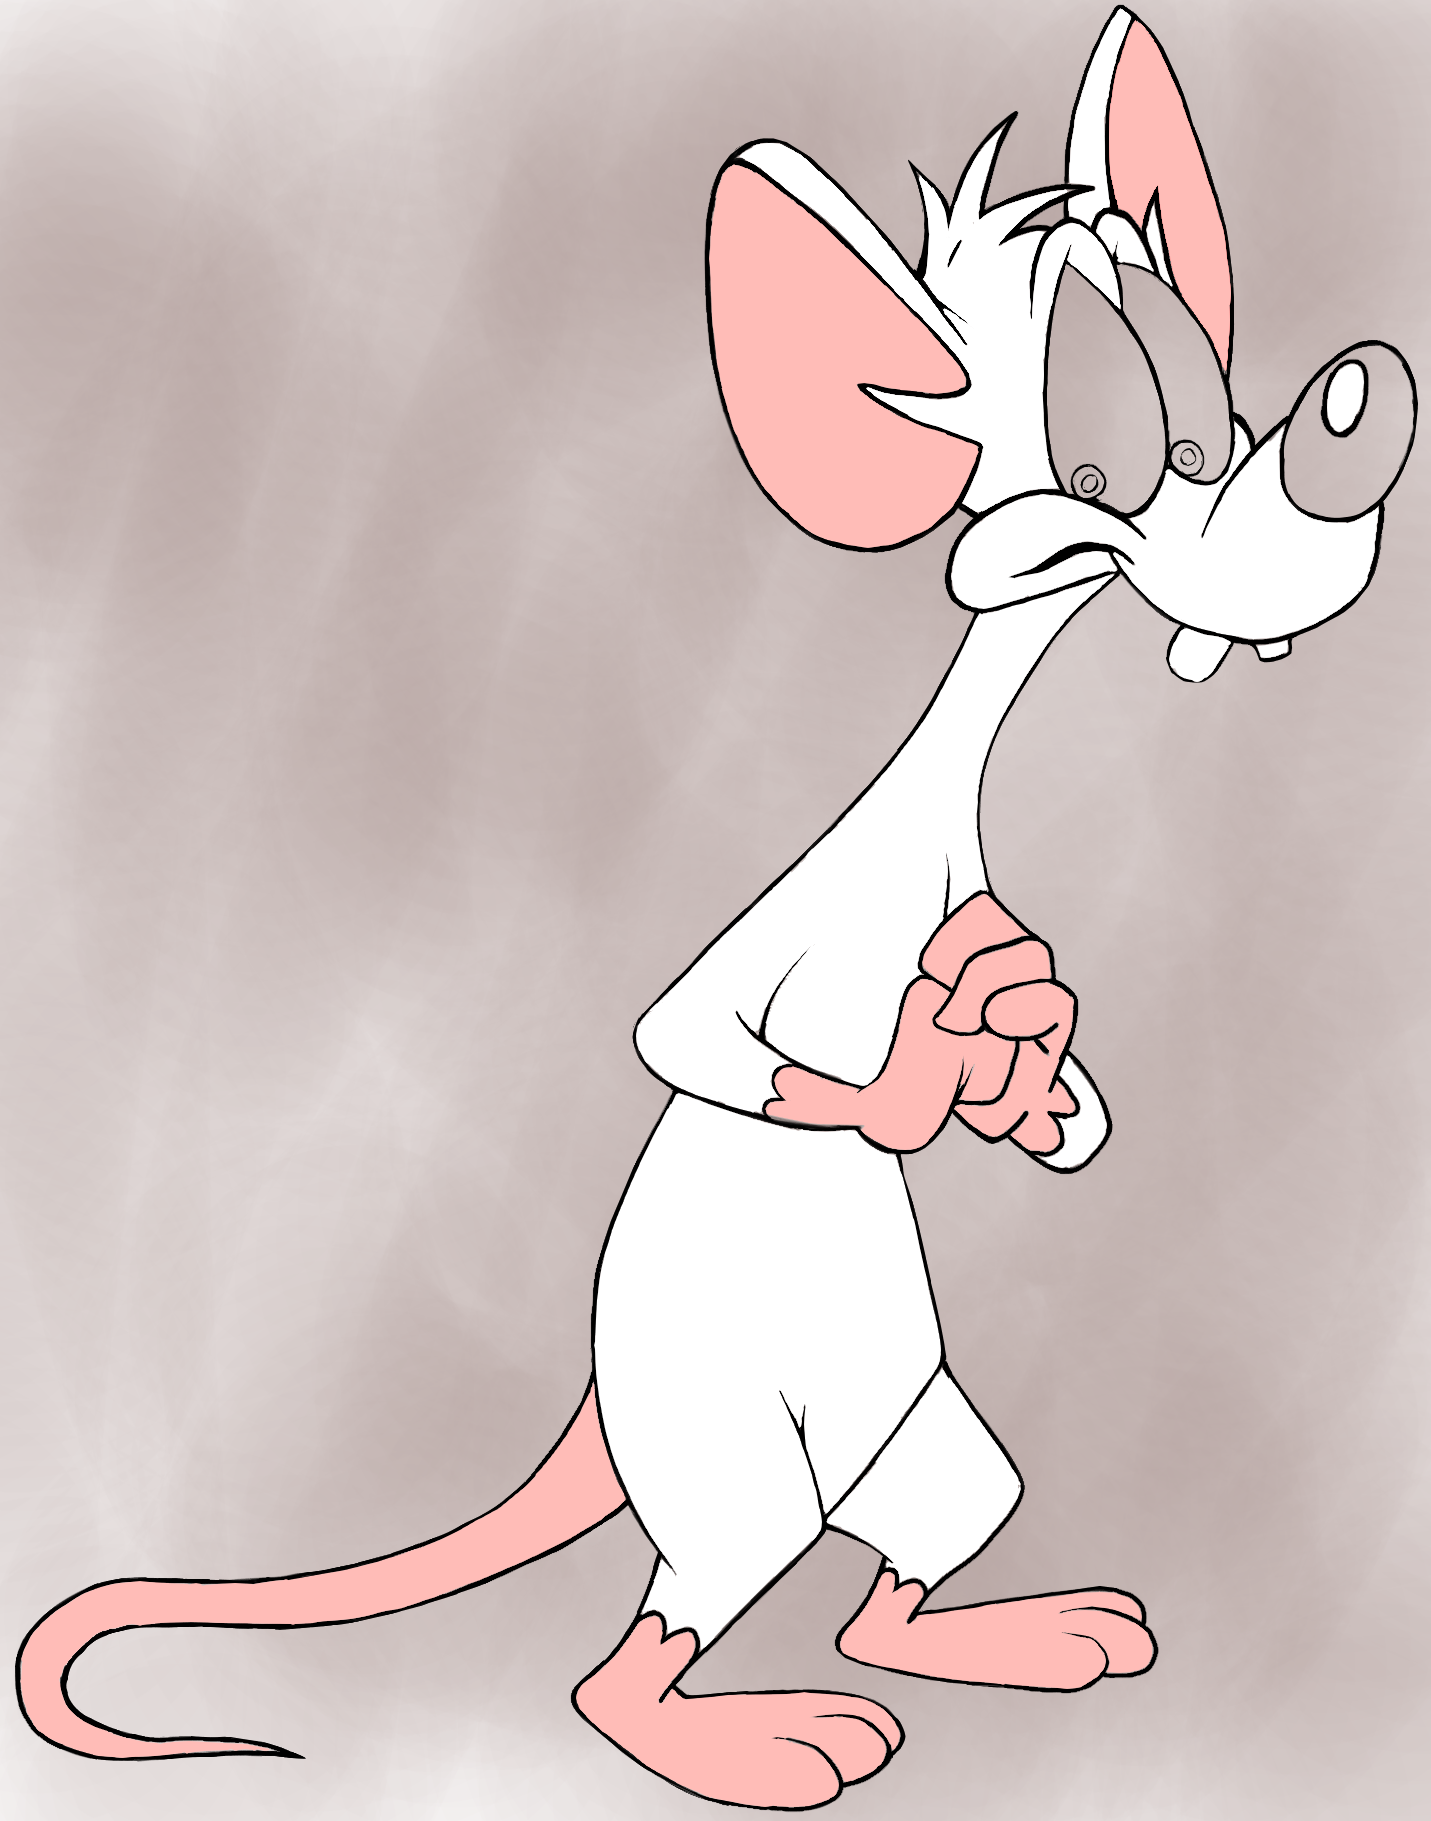 Pinky-And-The-Brain-Transparent-PNG 3.png